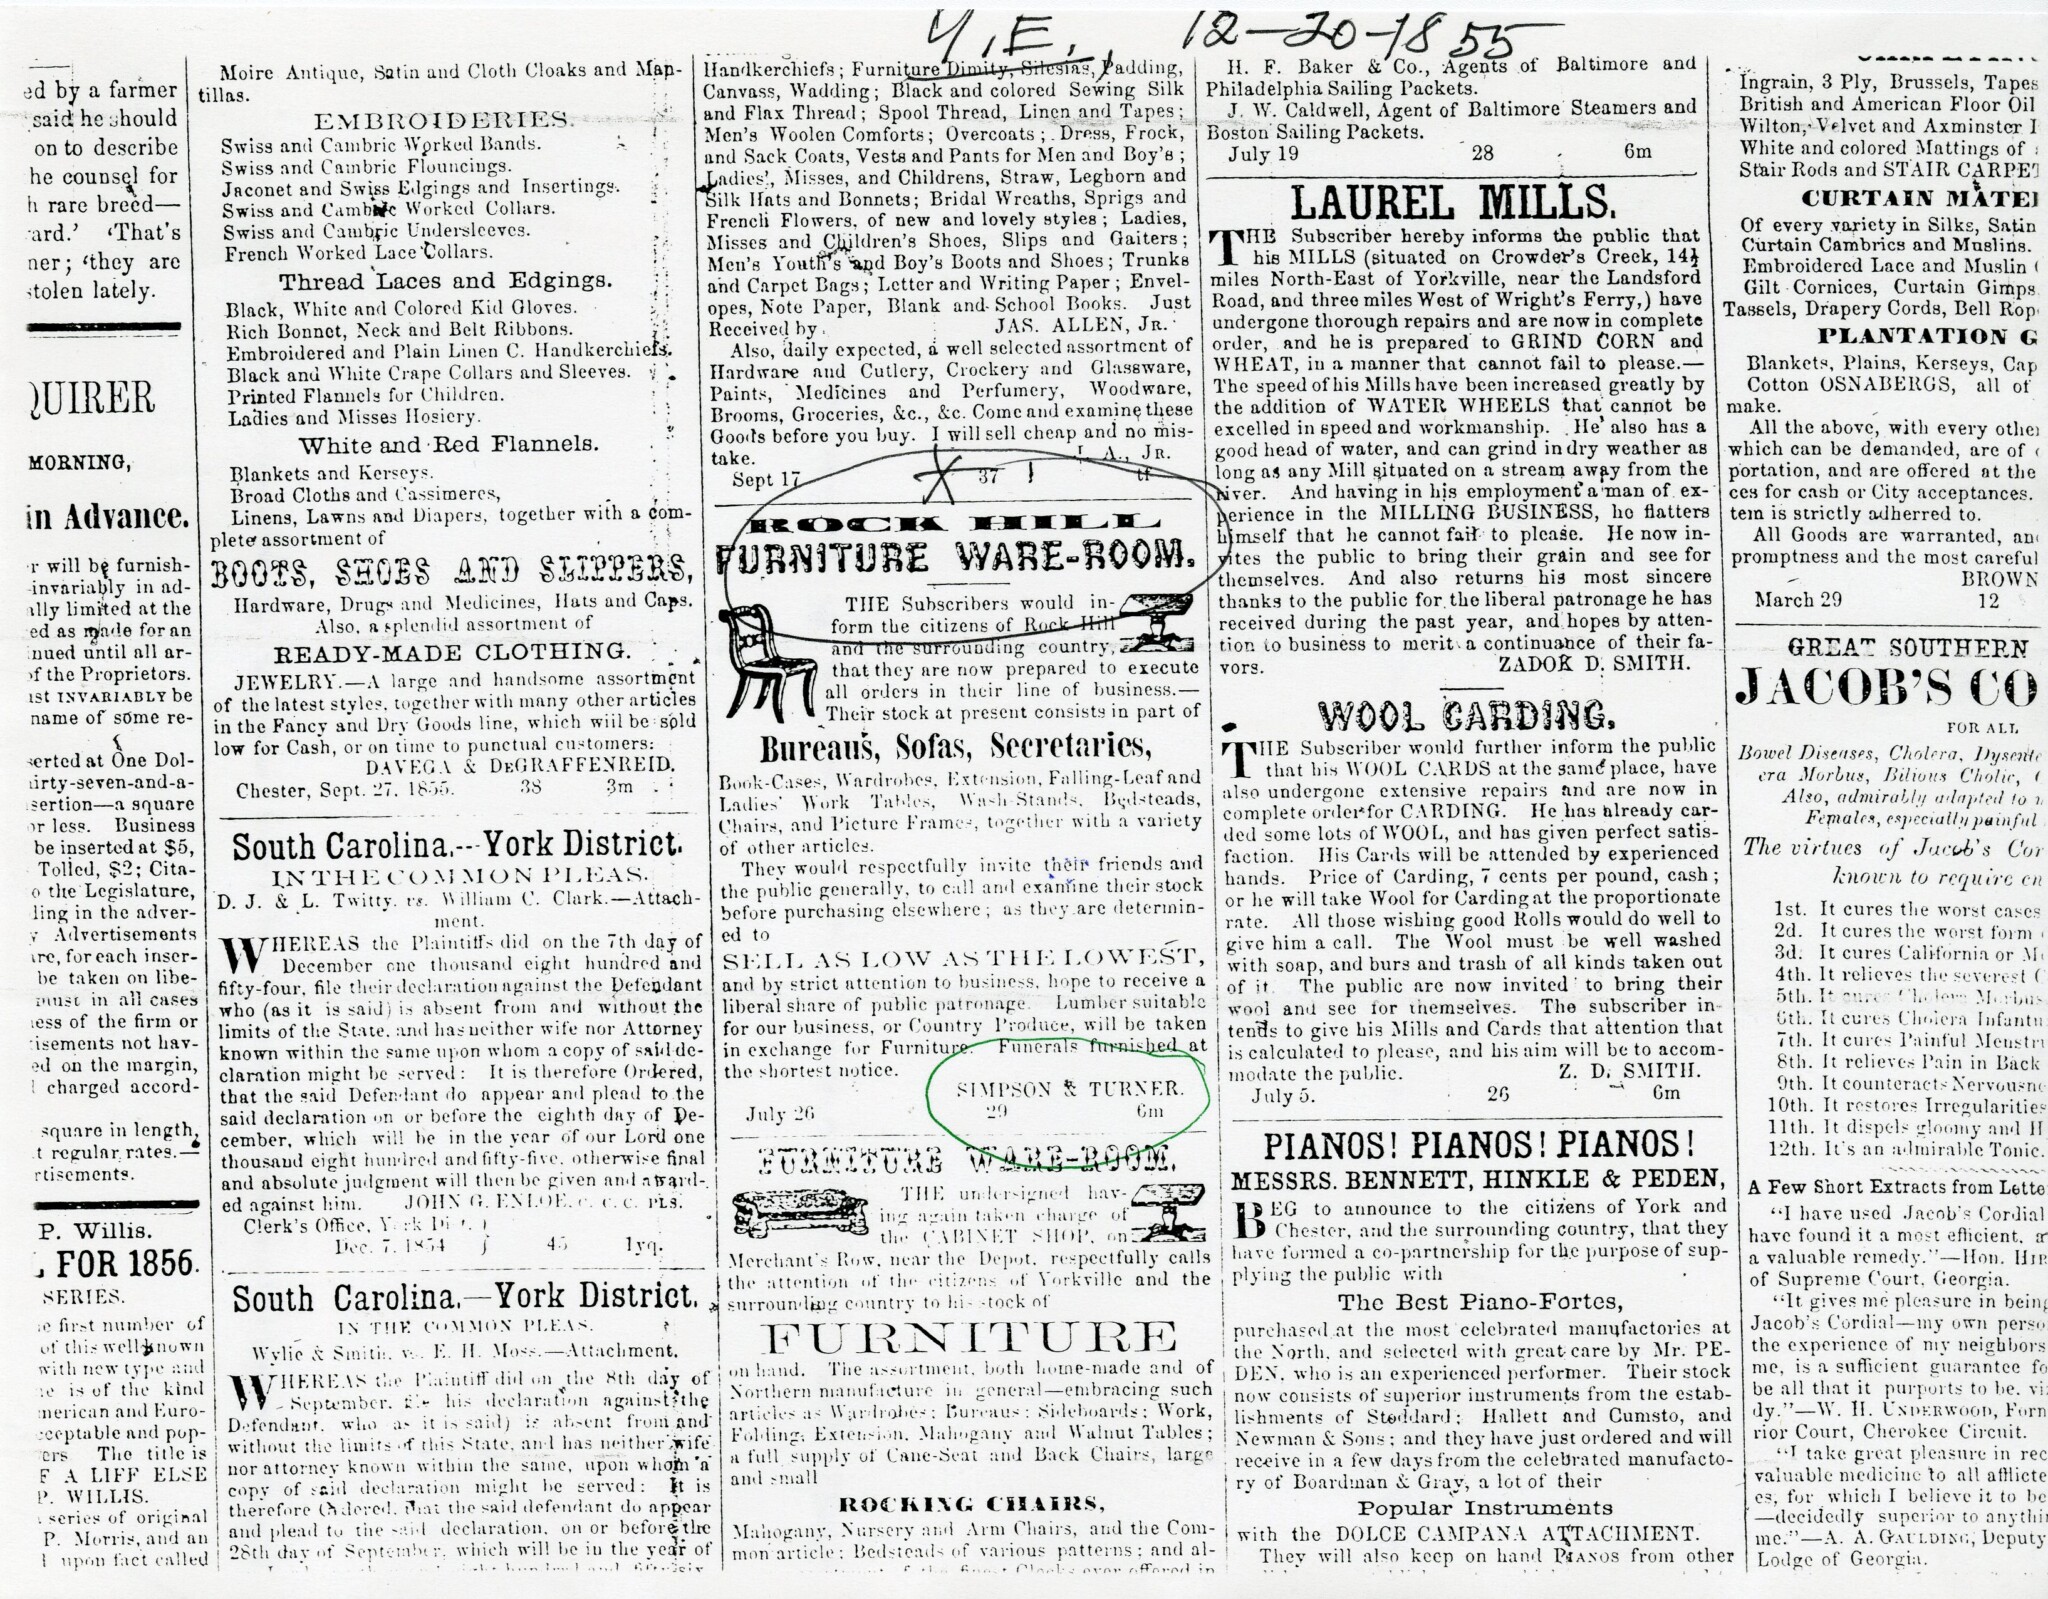 AD FROM THE FIRM OF SIMPSON AND TURNER - 1855